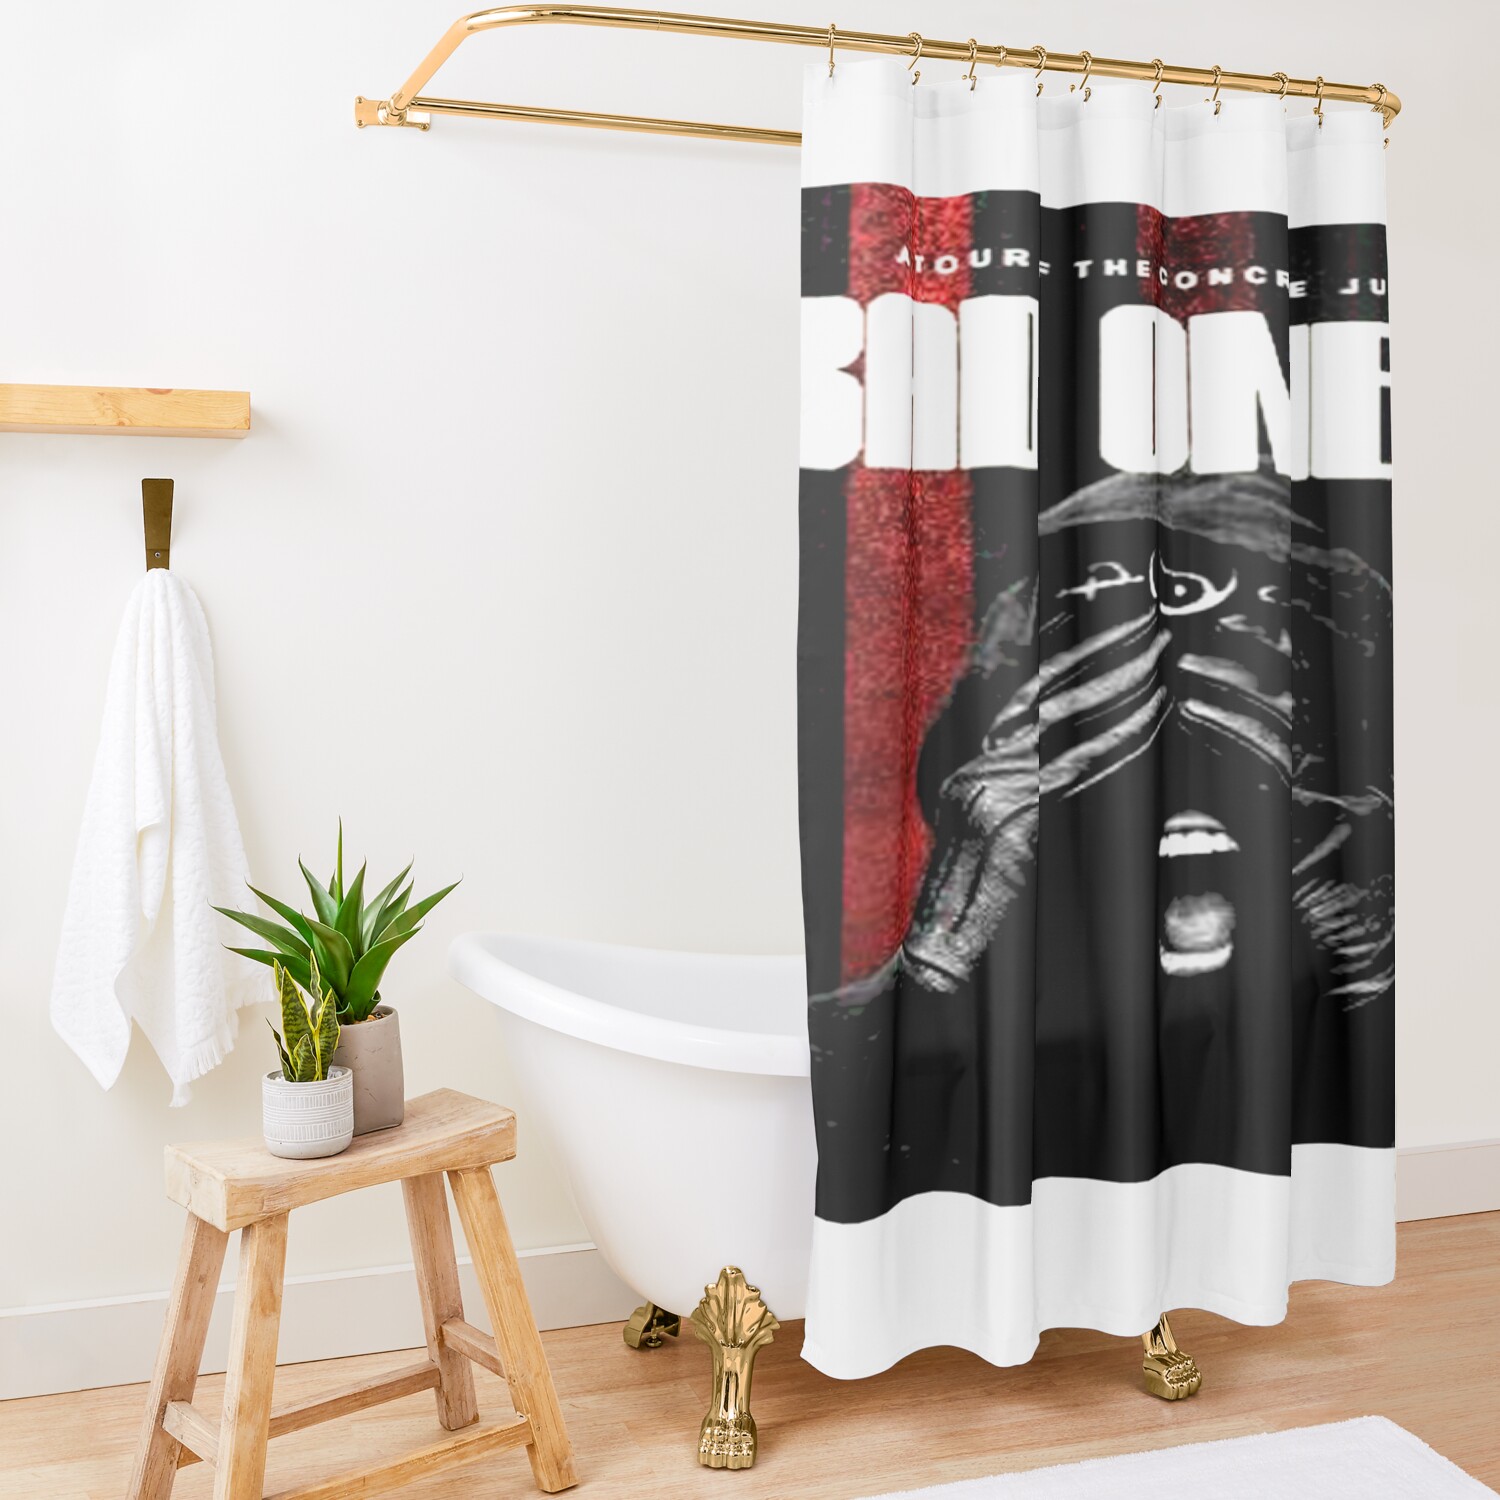 urshower curtain opensquare1500x1500 9 - Bad Omens Shop